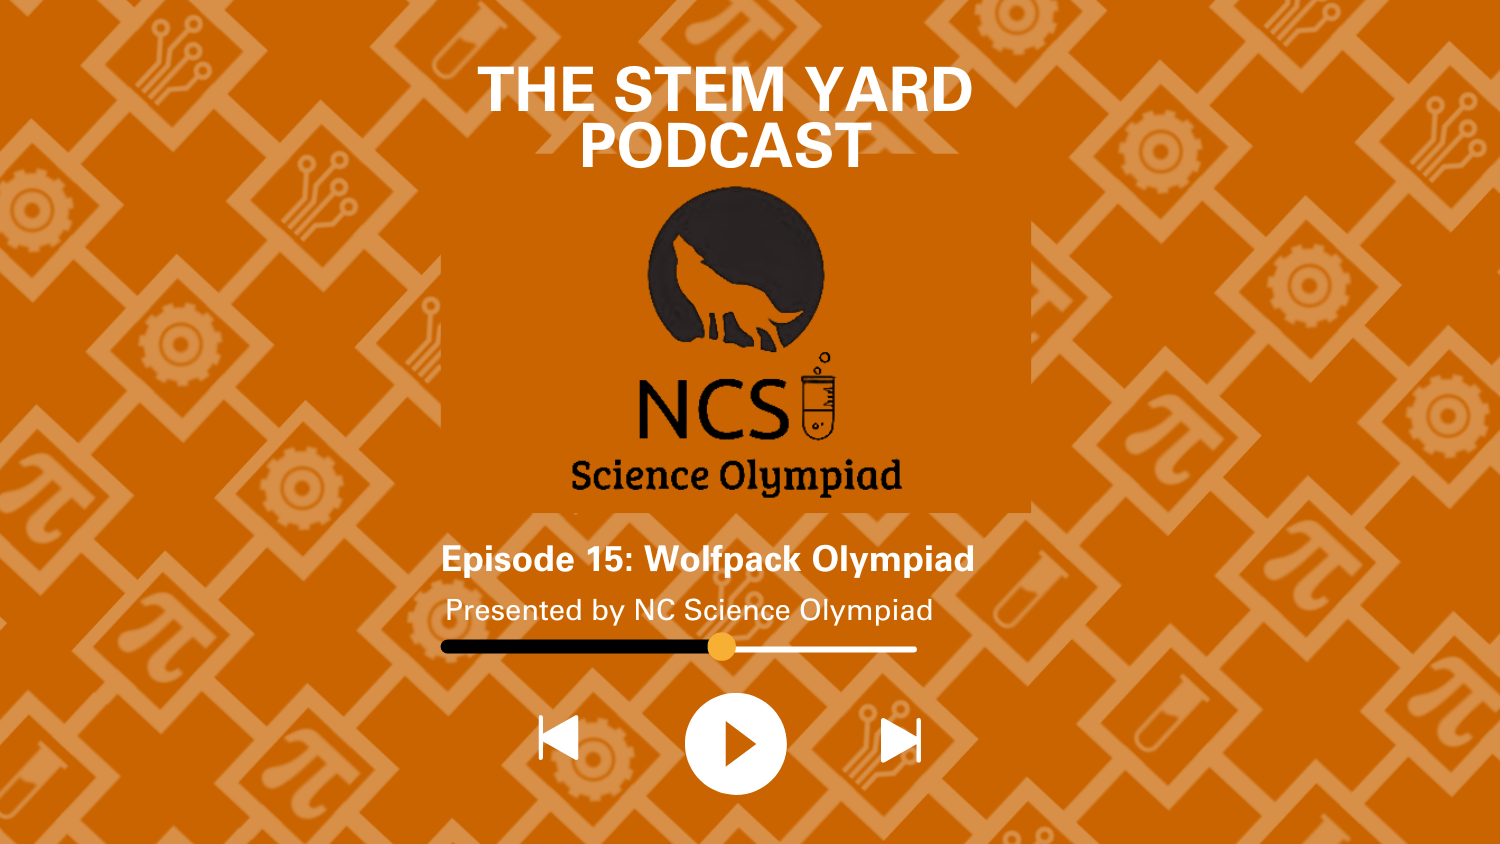 The STEM Yard - Episode 15 Wolfpack Olympiad